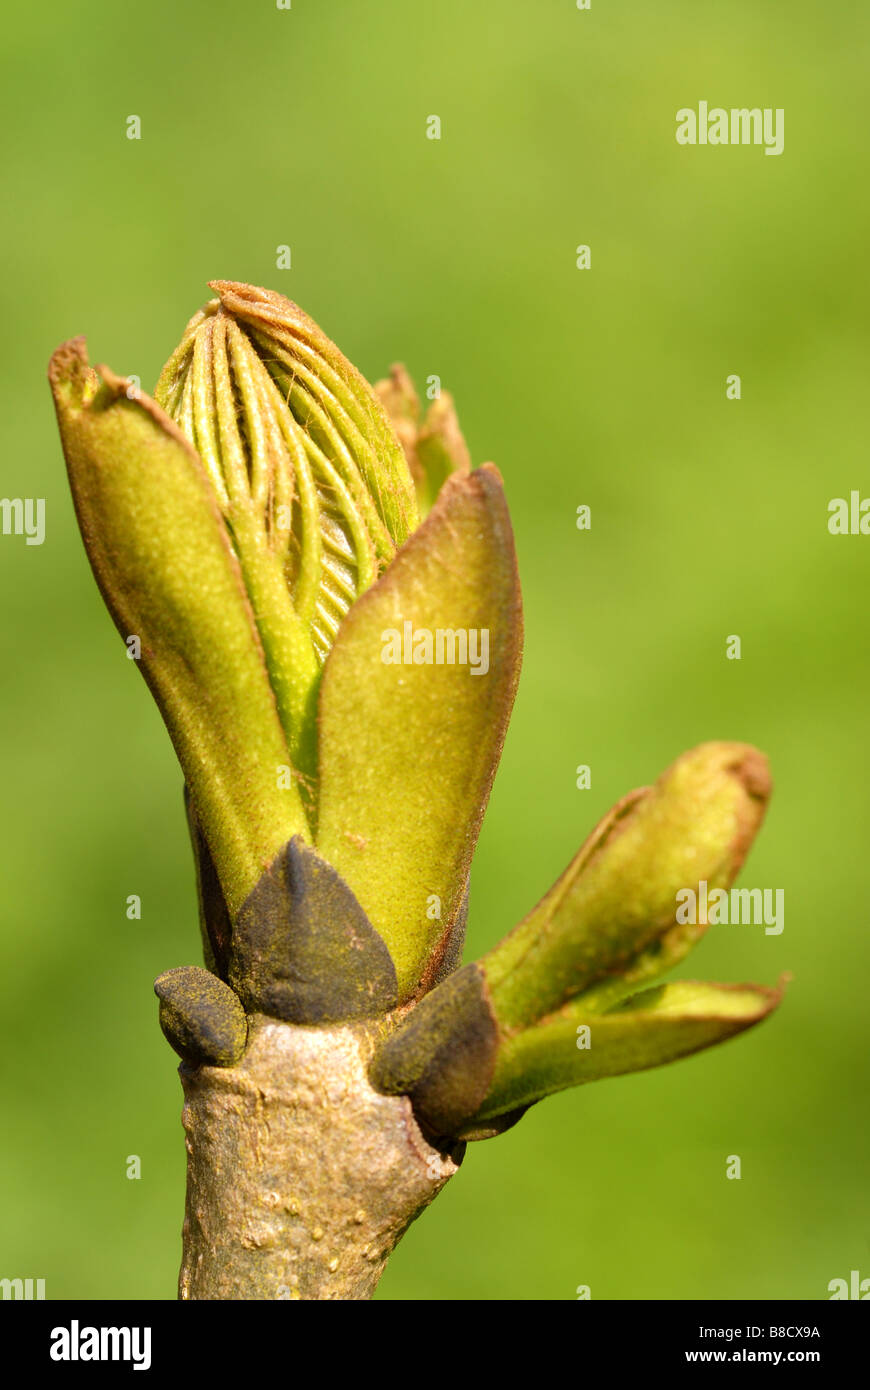 sprouting spring bud of European Ash (Fraxinus excelsior) Stock Photo